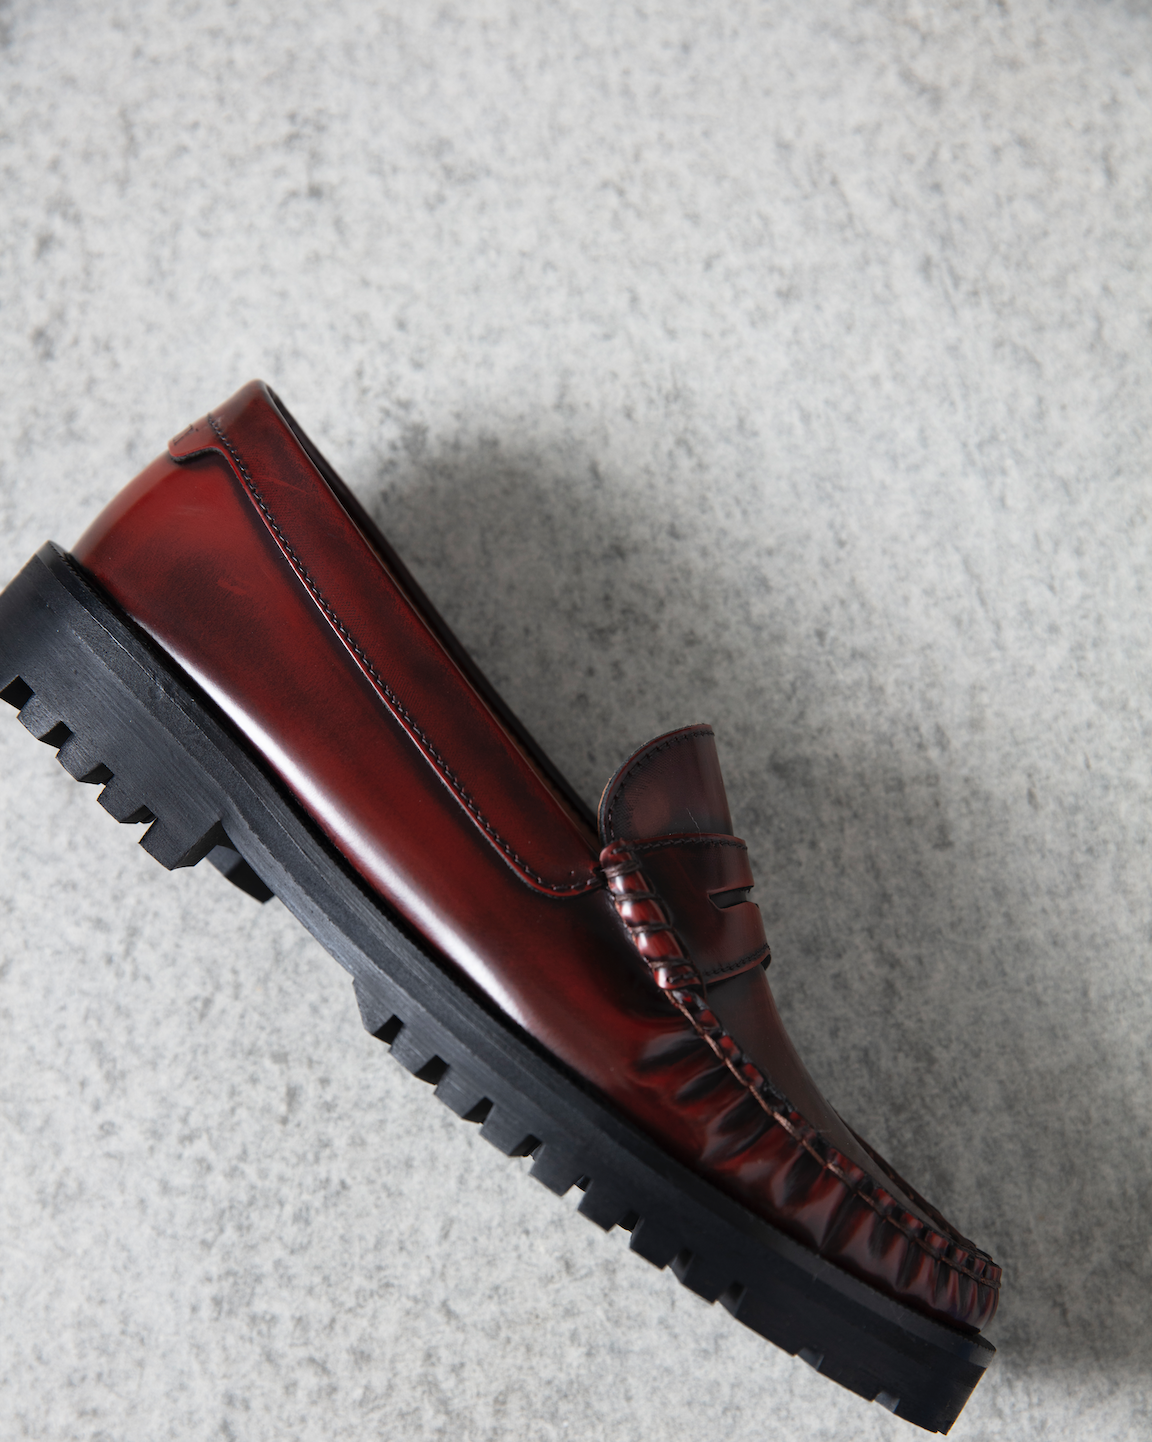 Bordeaux Penny Chunky Loafer